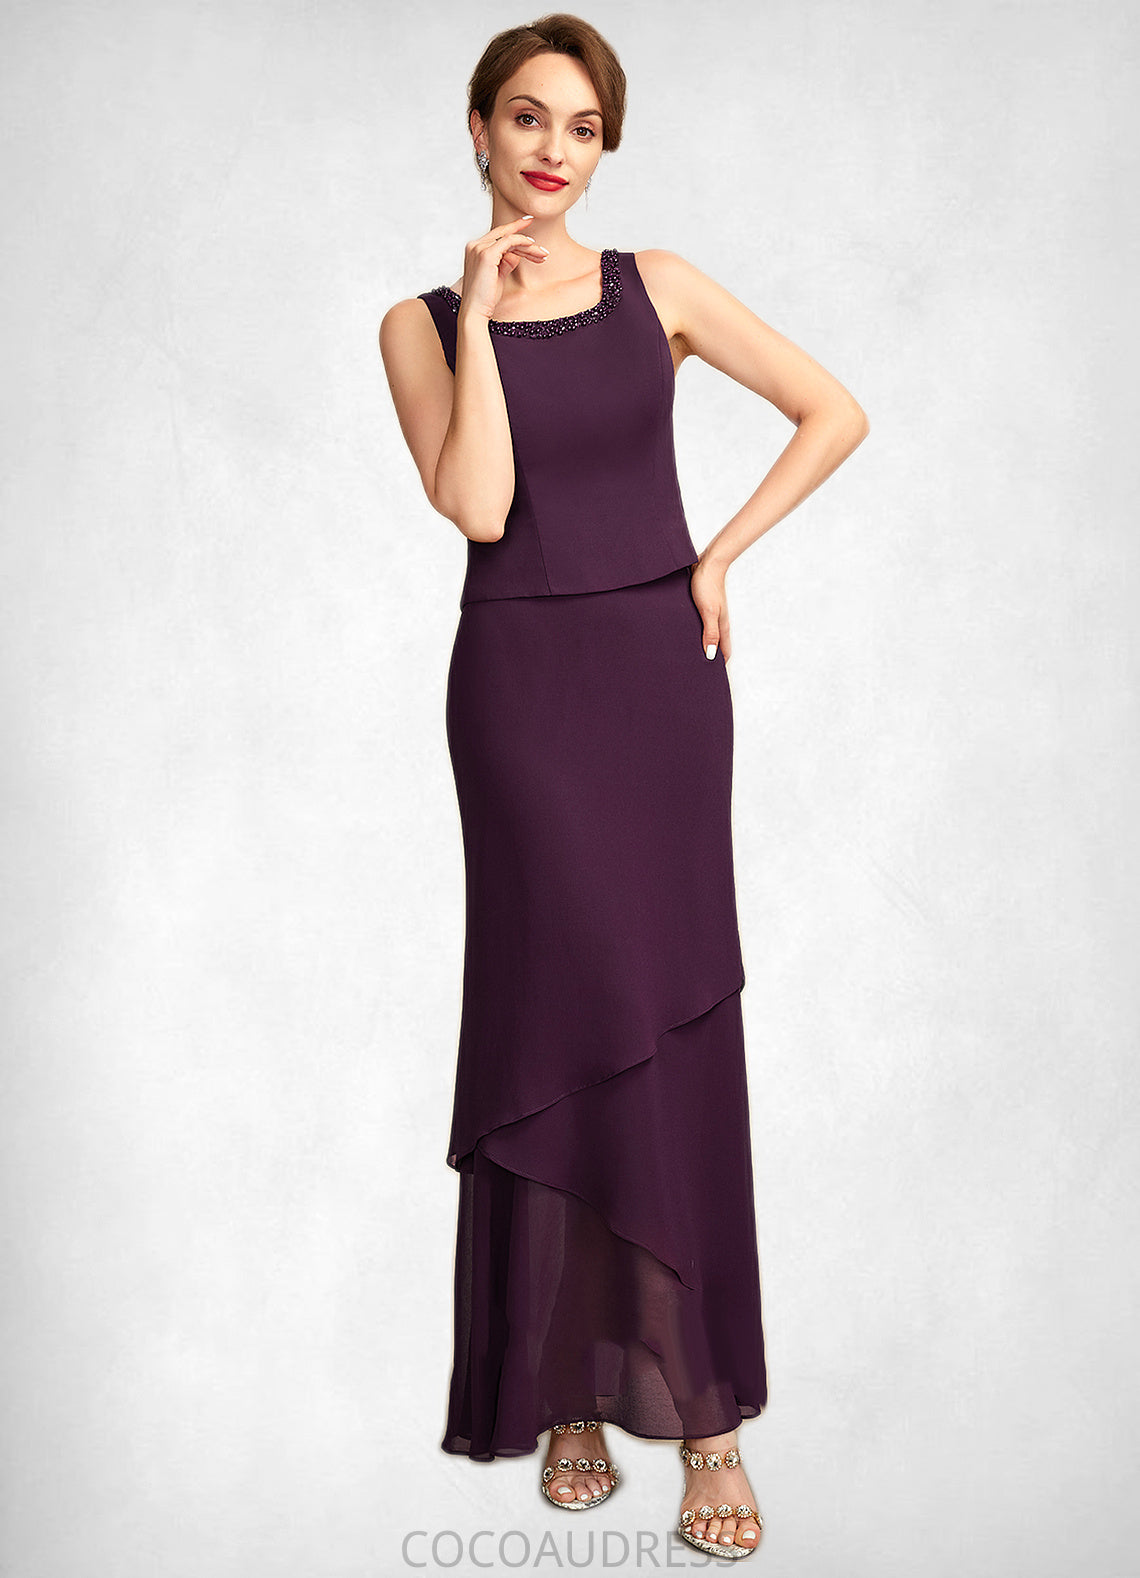 Sharon Sheath/Column Scoop Neck Ankle-Length Chiffon Mother of the Bride Dress With Beading Sequins 126P0015024